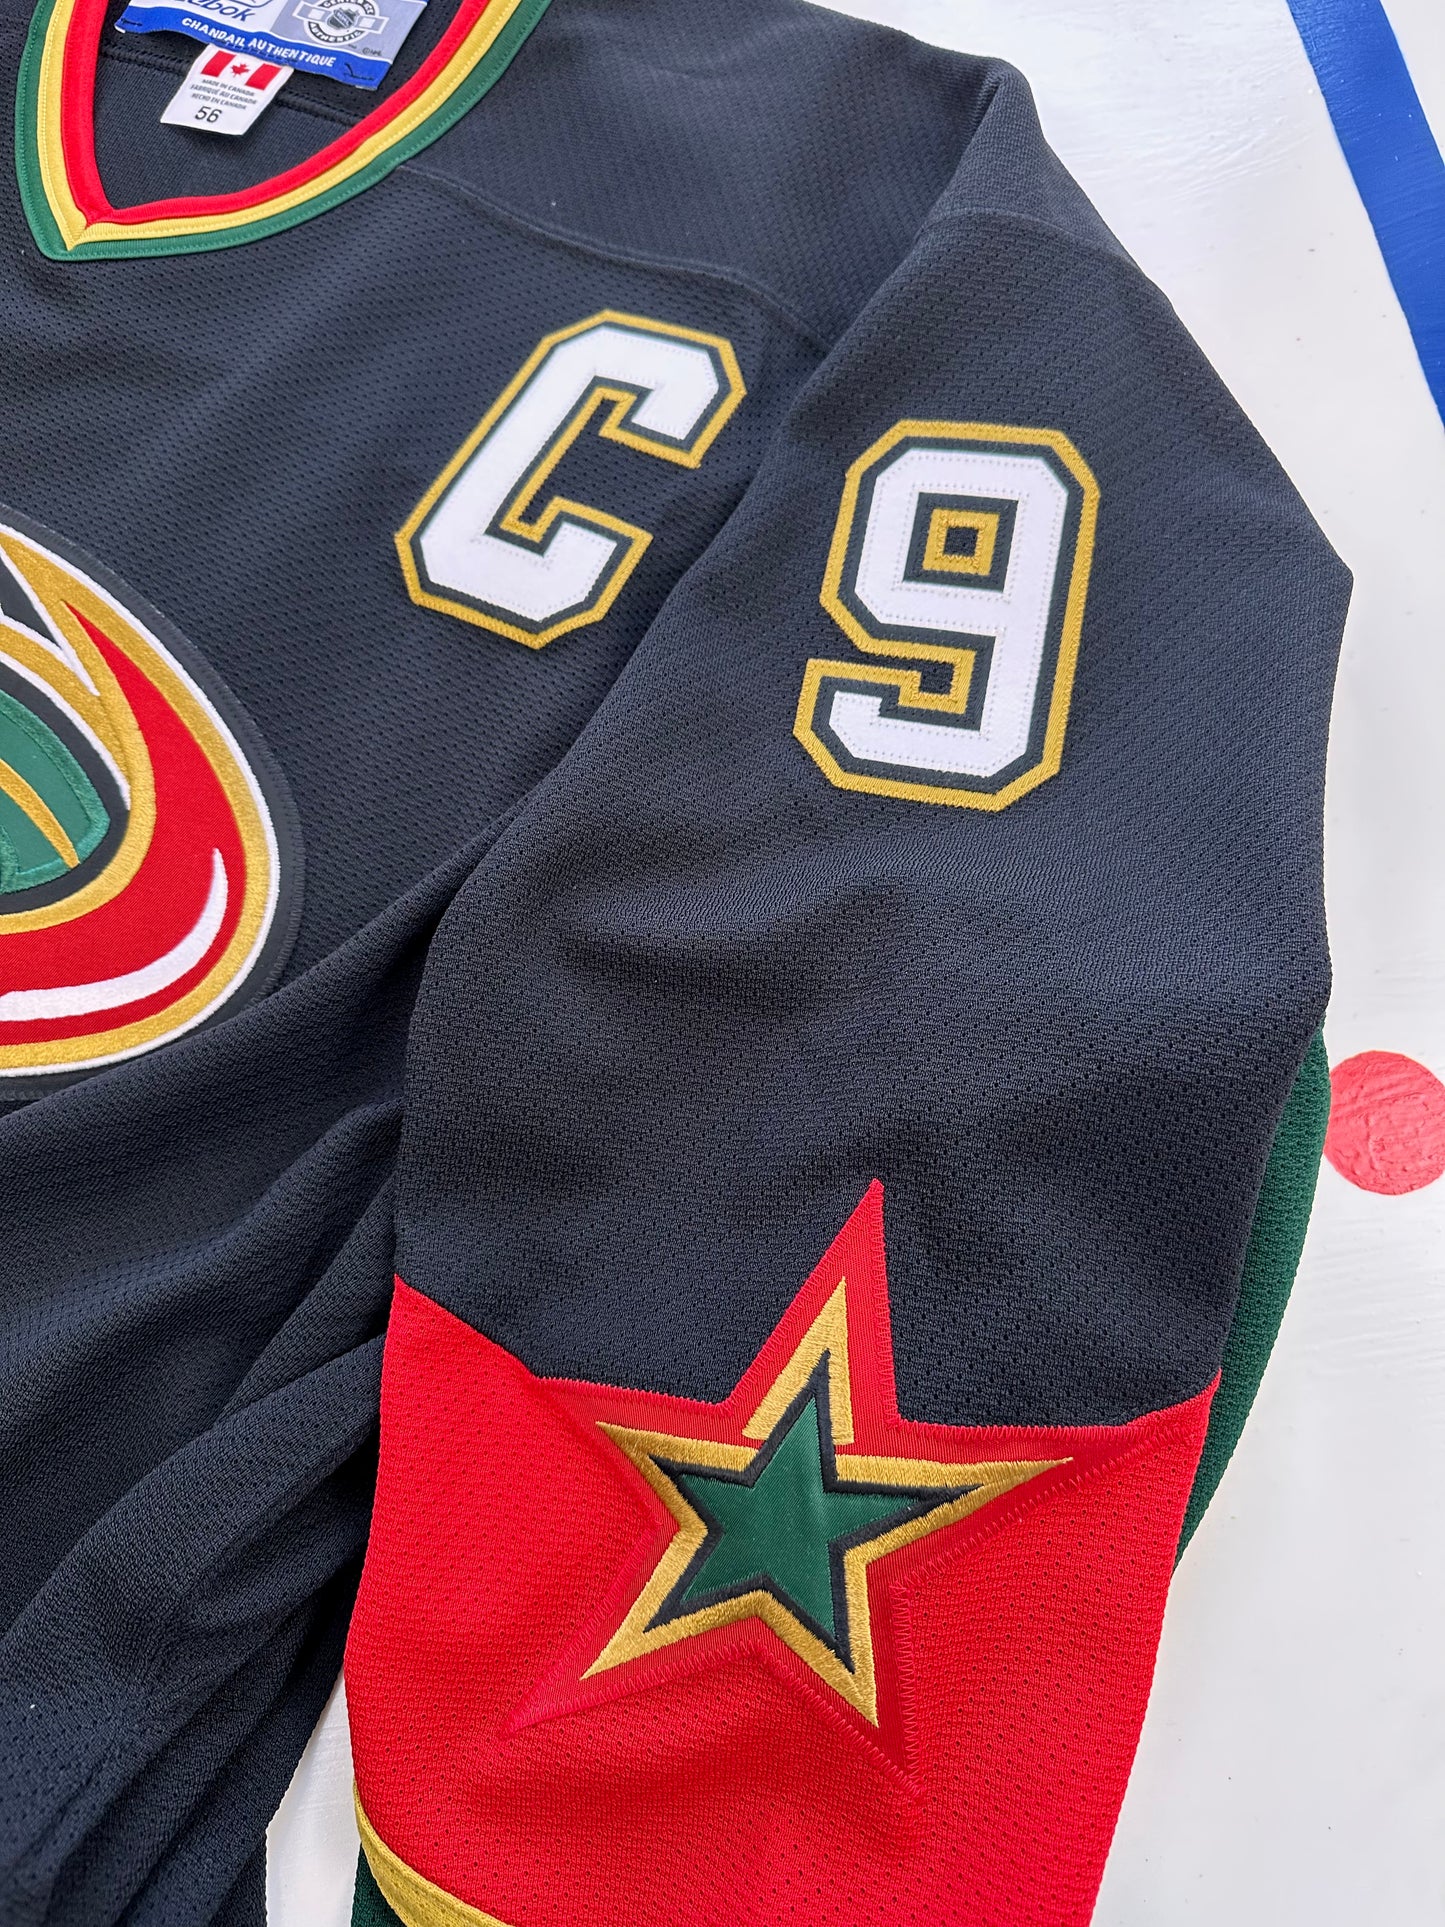 Mike Modano makes his true feelings known about the Mooterus jersey :  r/hockeyjerseys